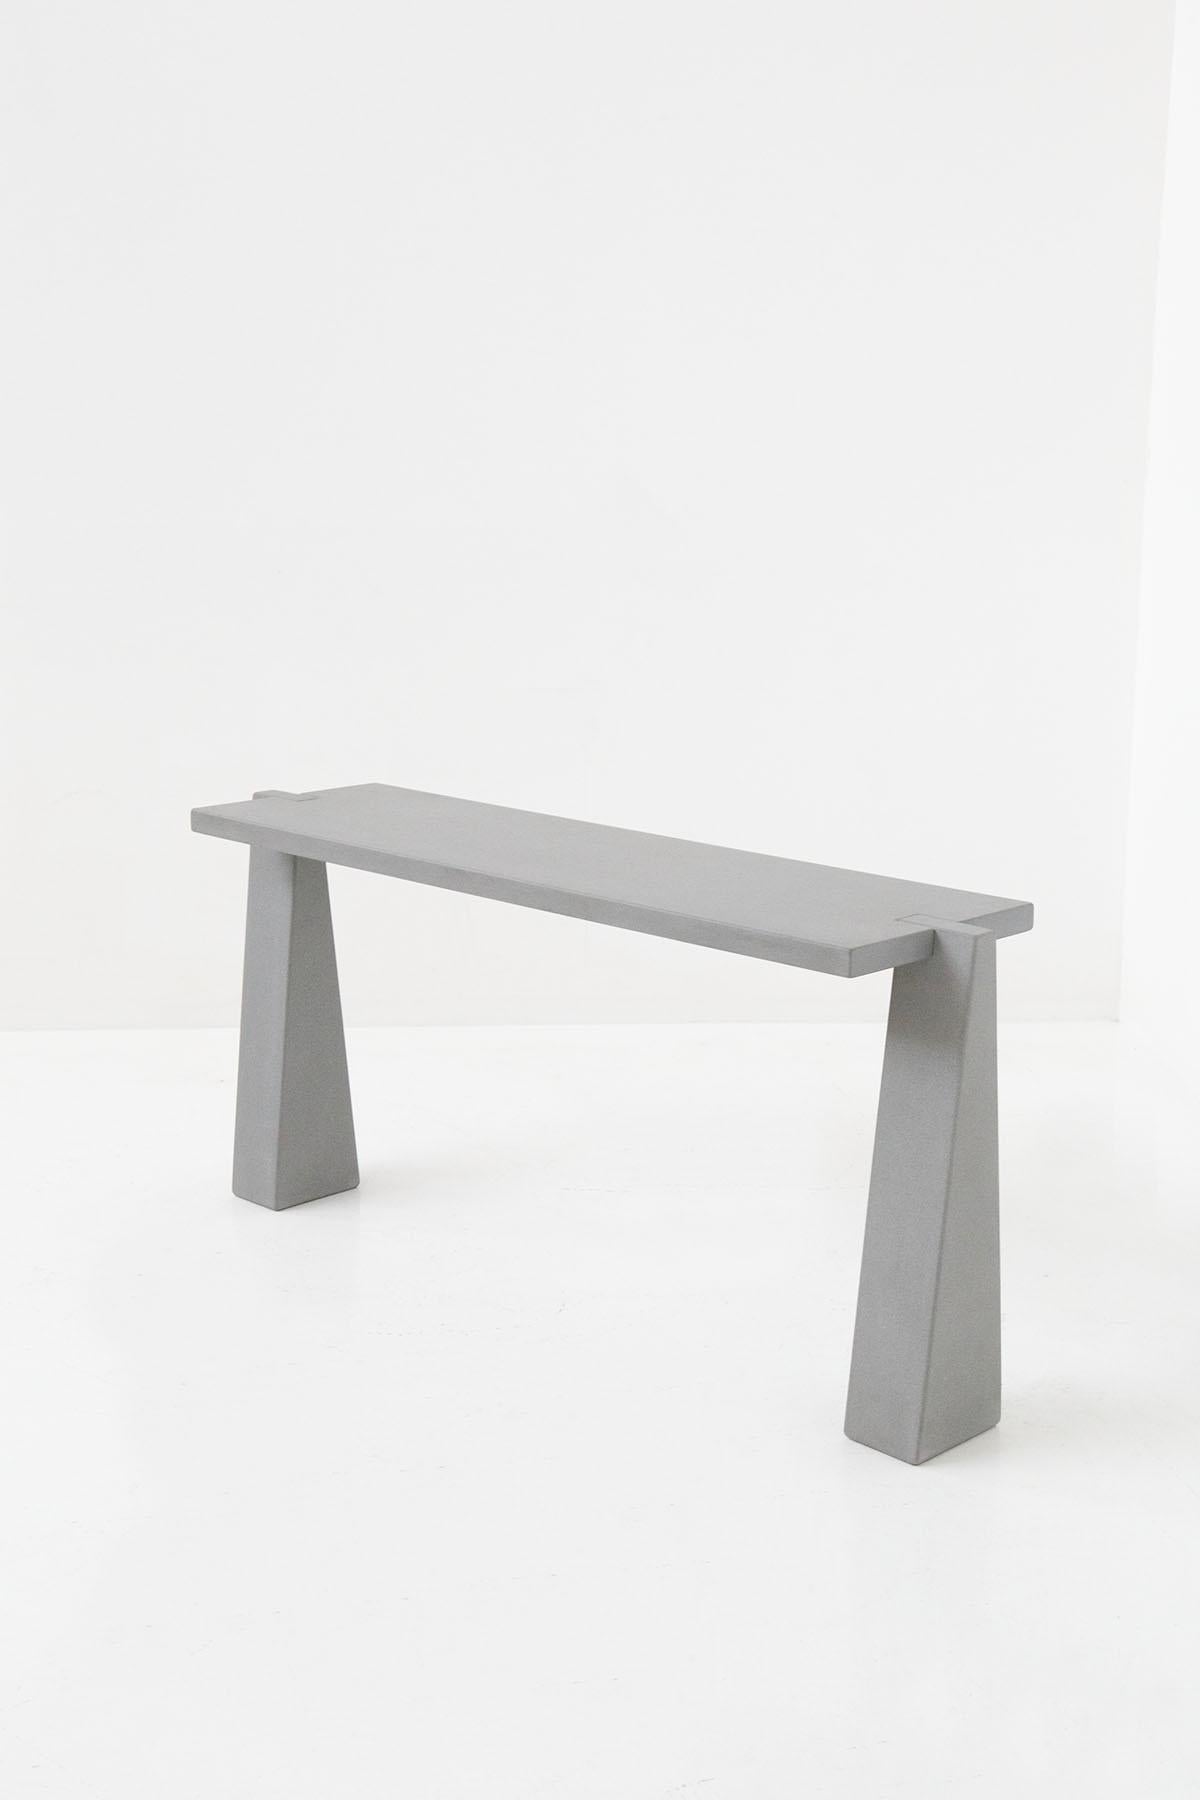 Italian Pietra Serena console table design Angelo Mangiarotti. The console table is made entirely of stone and is made with clean, essential lines and form typical of Mangiarotti's design. This console table resembling monoliths is a great example